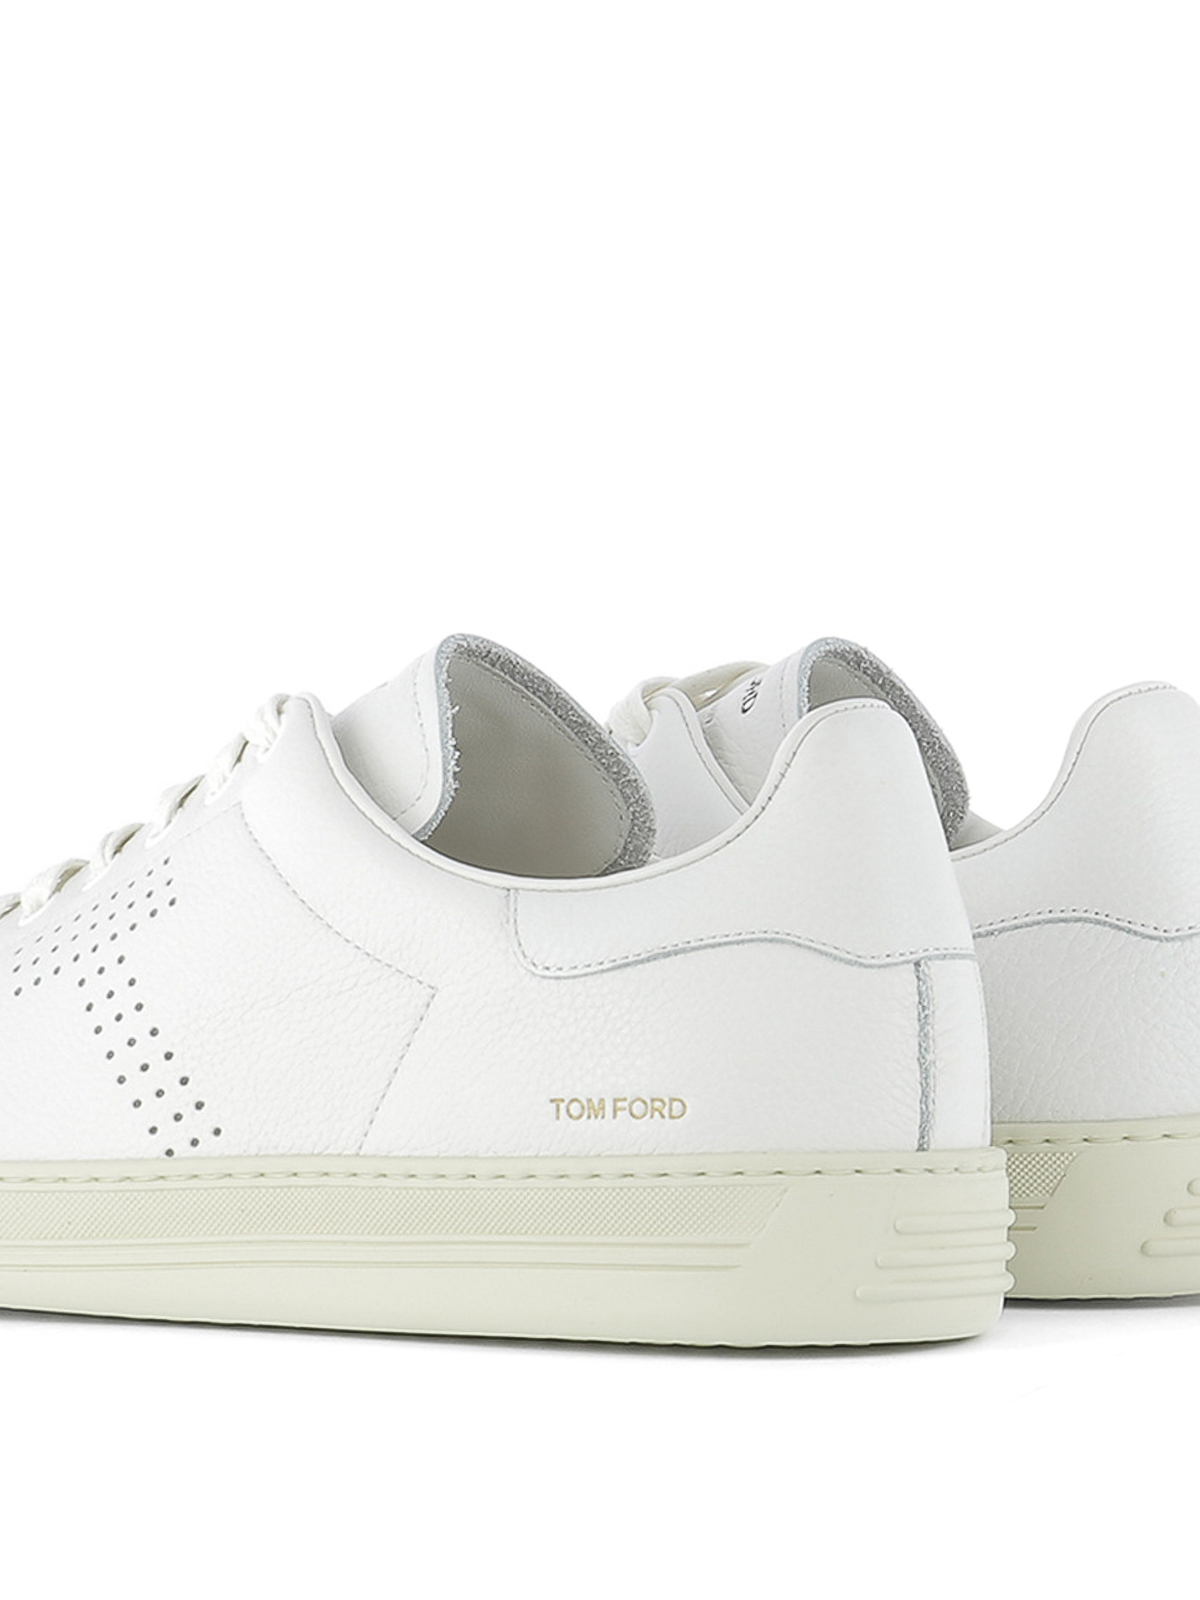 Trainers Tom Ford - Perforated logo leather sneakers - J1045TDAPBRR